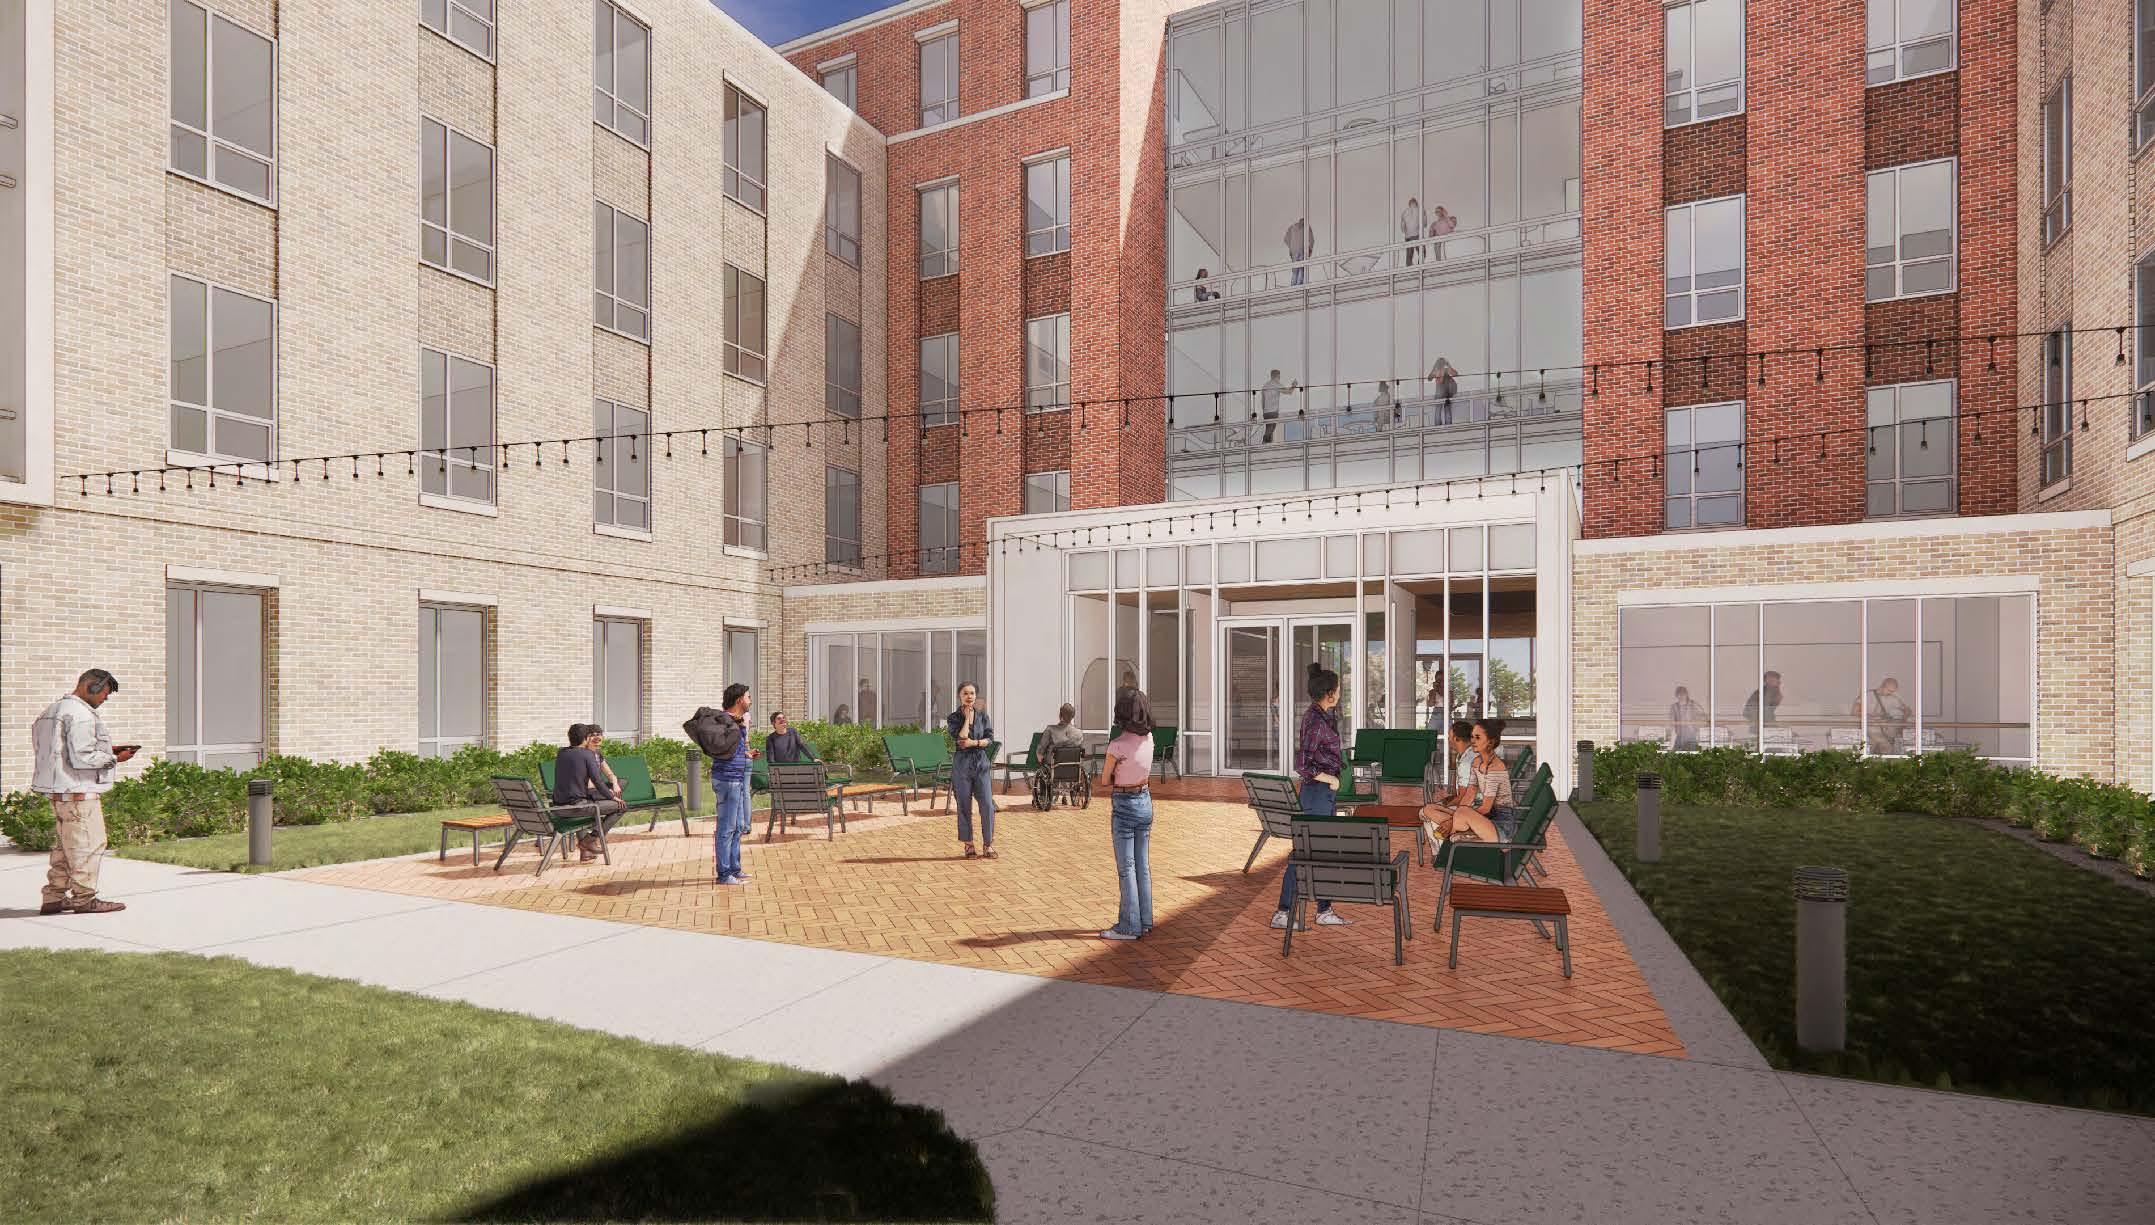 Building entry rendering for new South Green construction project